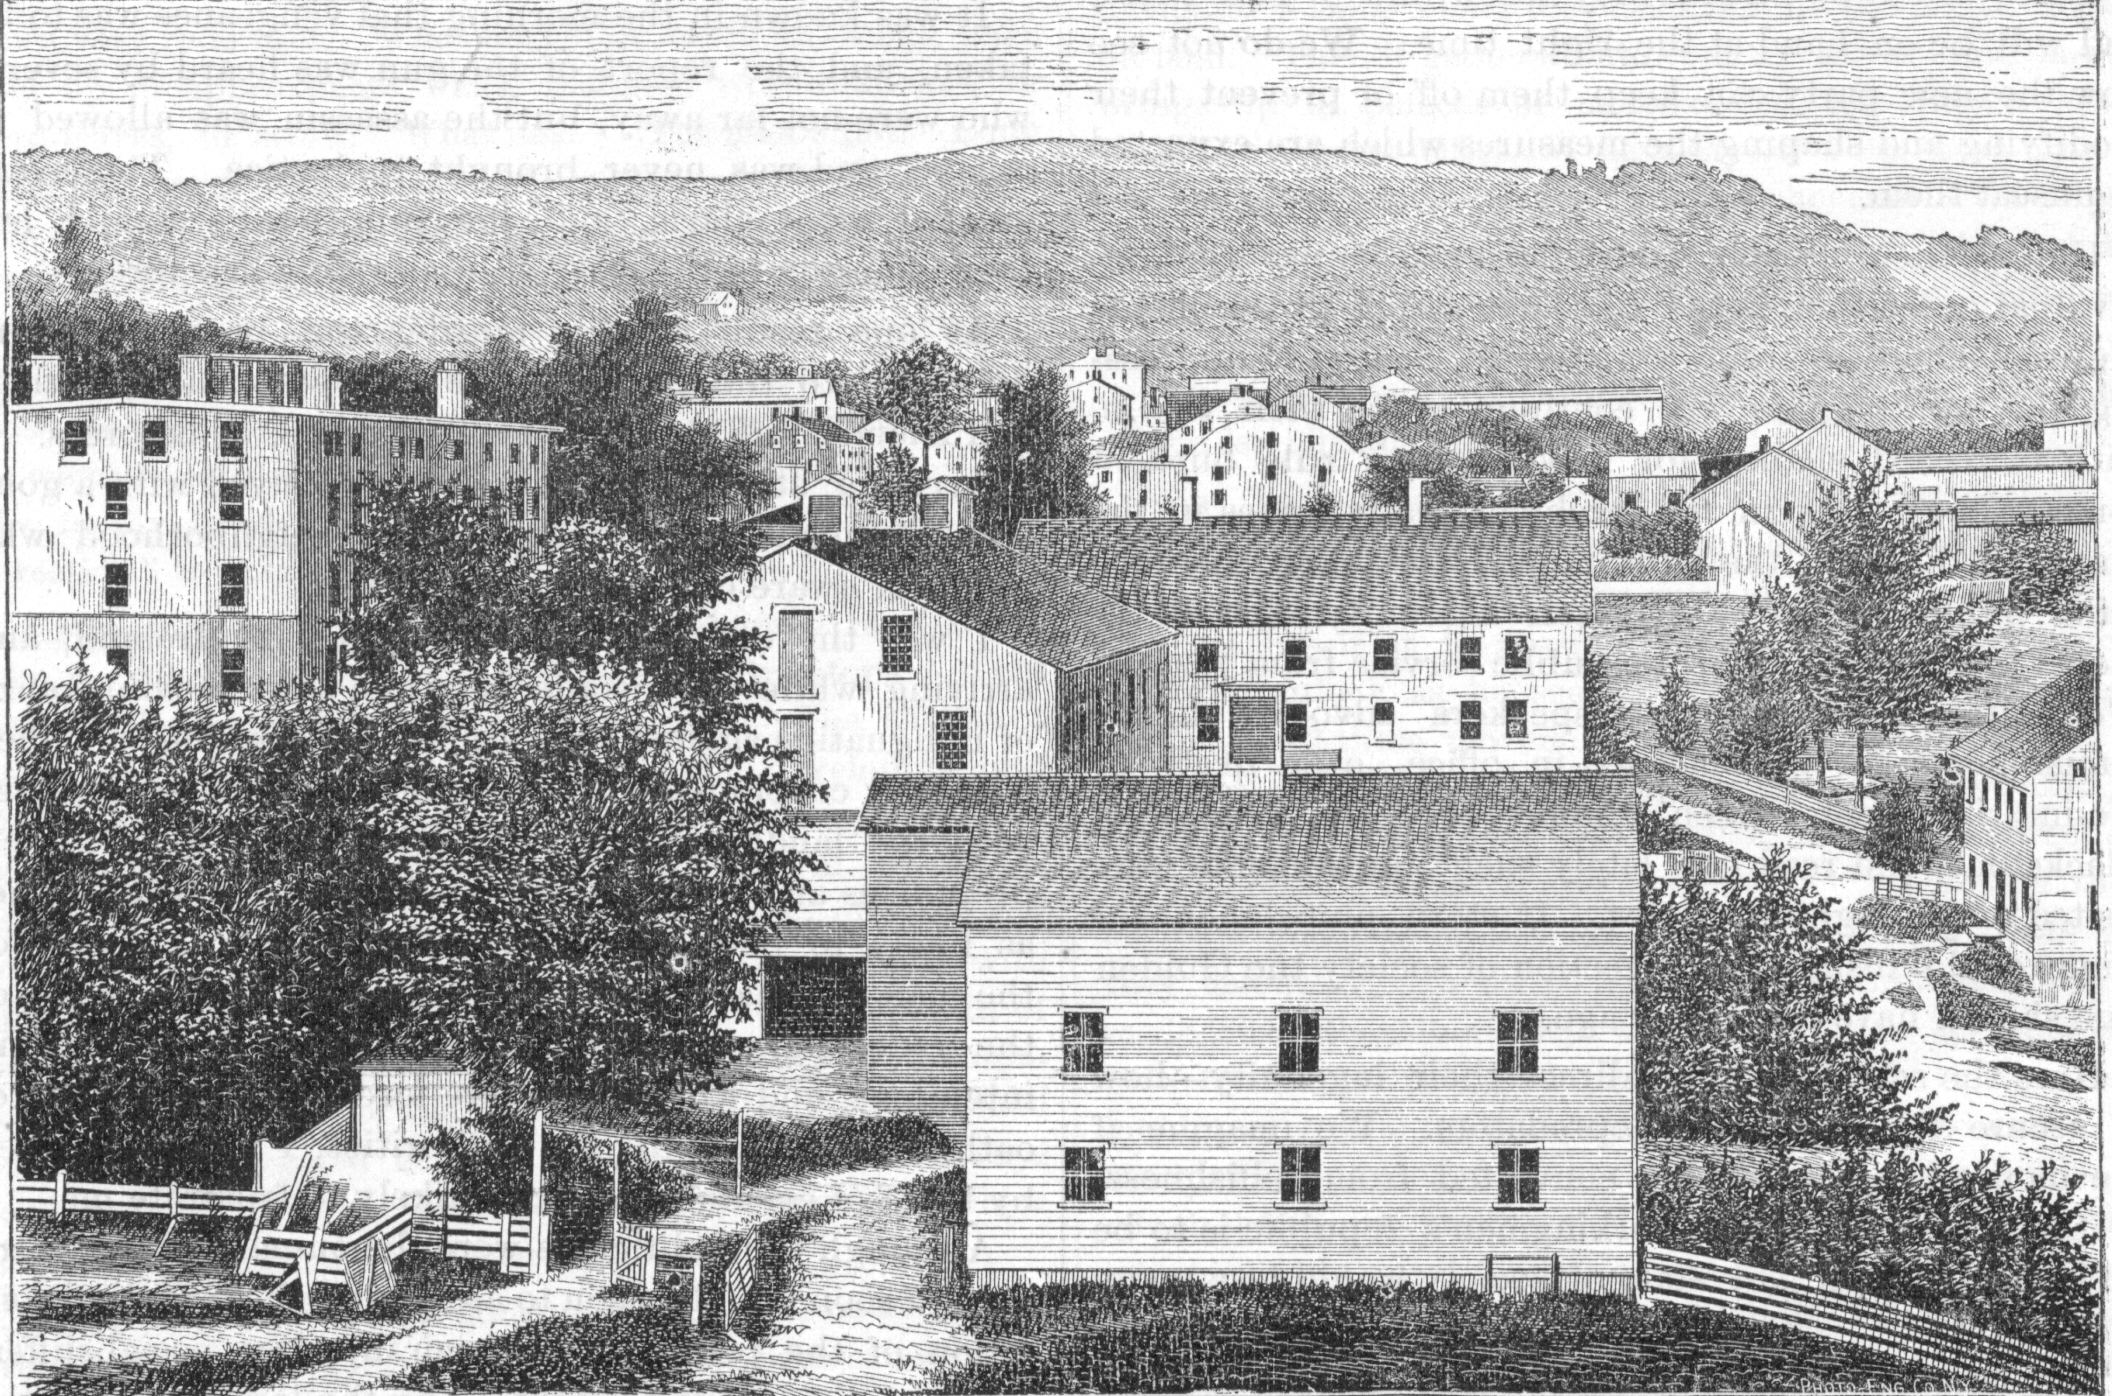 An old black and white drawing of a town.